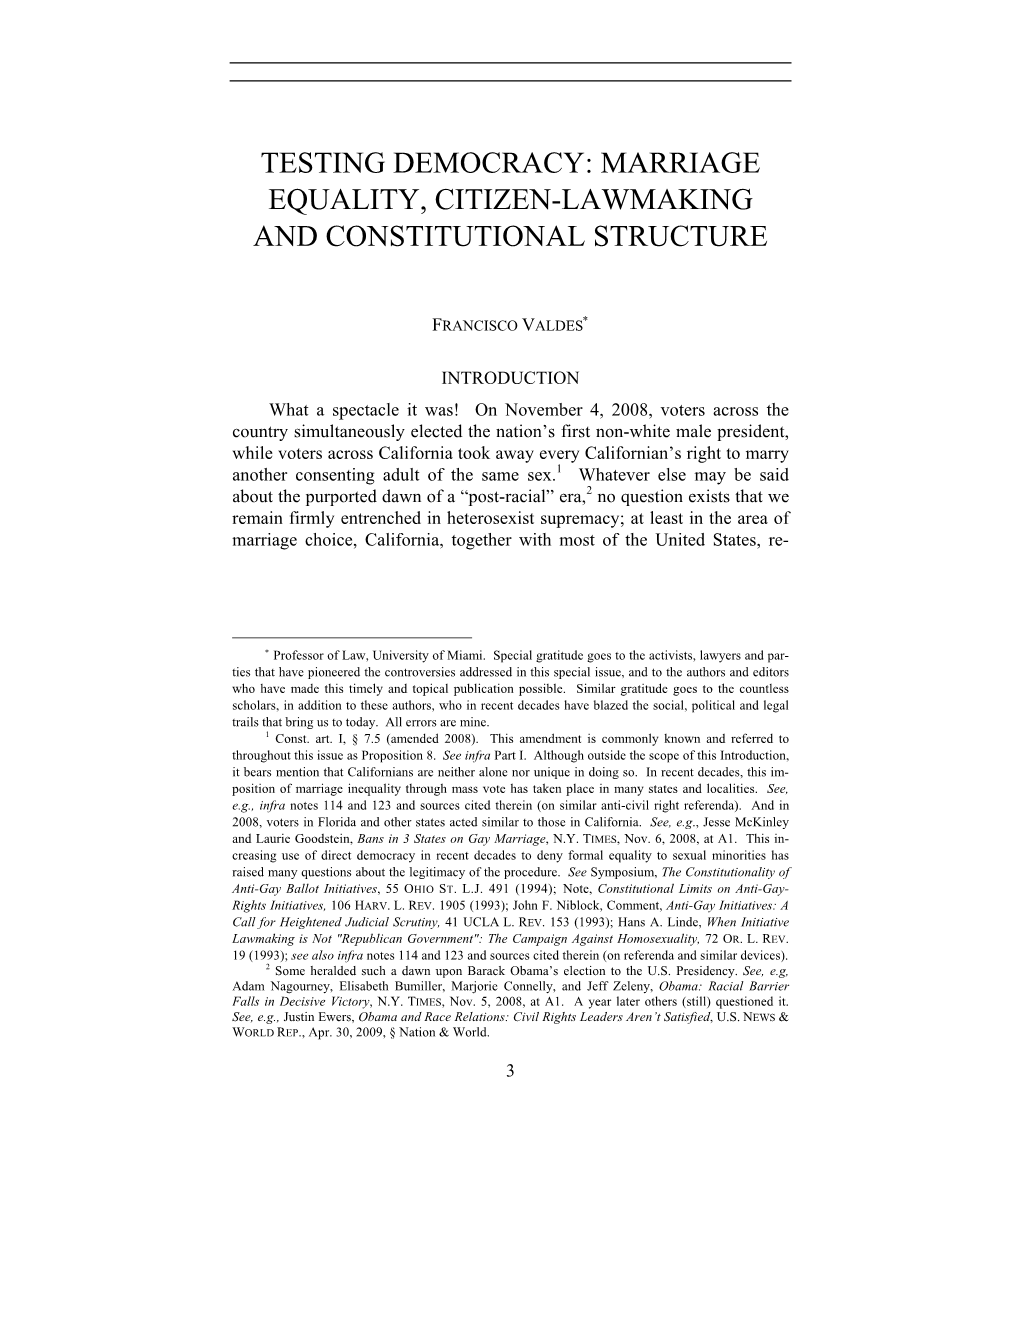 Testing Democracy: Marriage Equality, Citizen-Lawmaking and Constitutional Structure